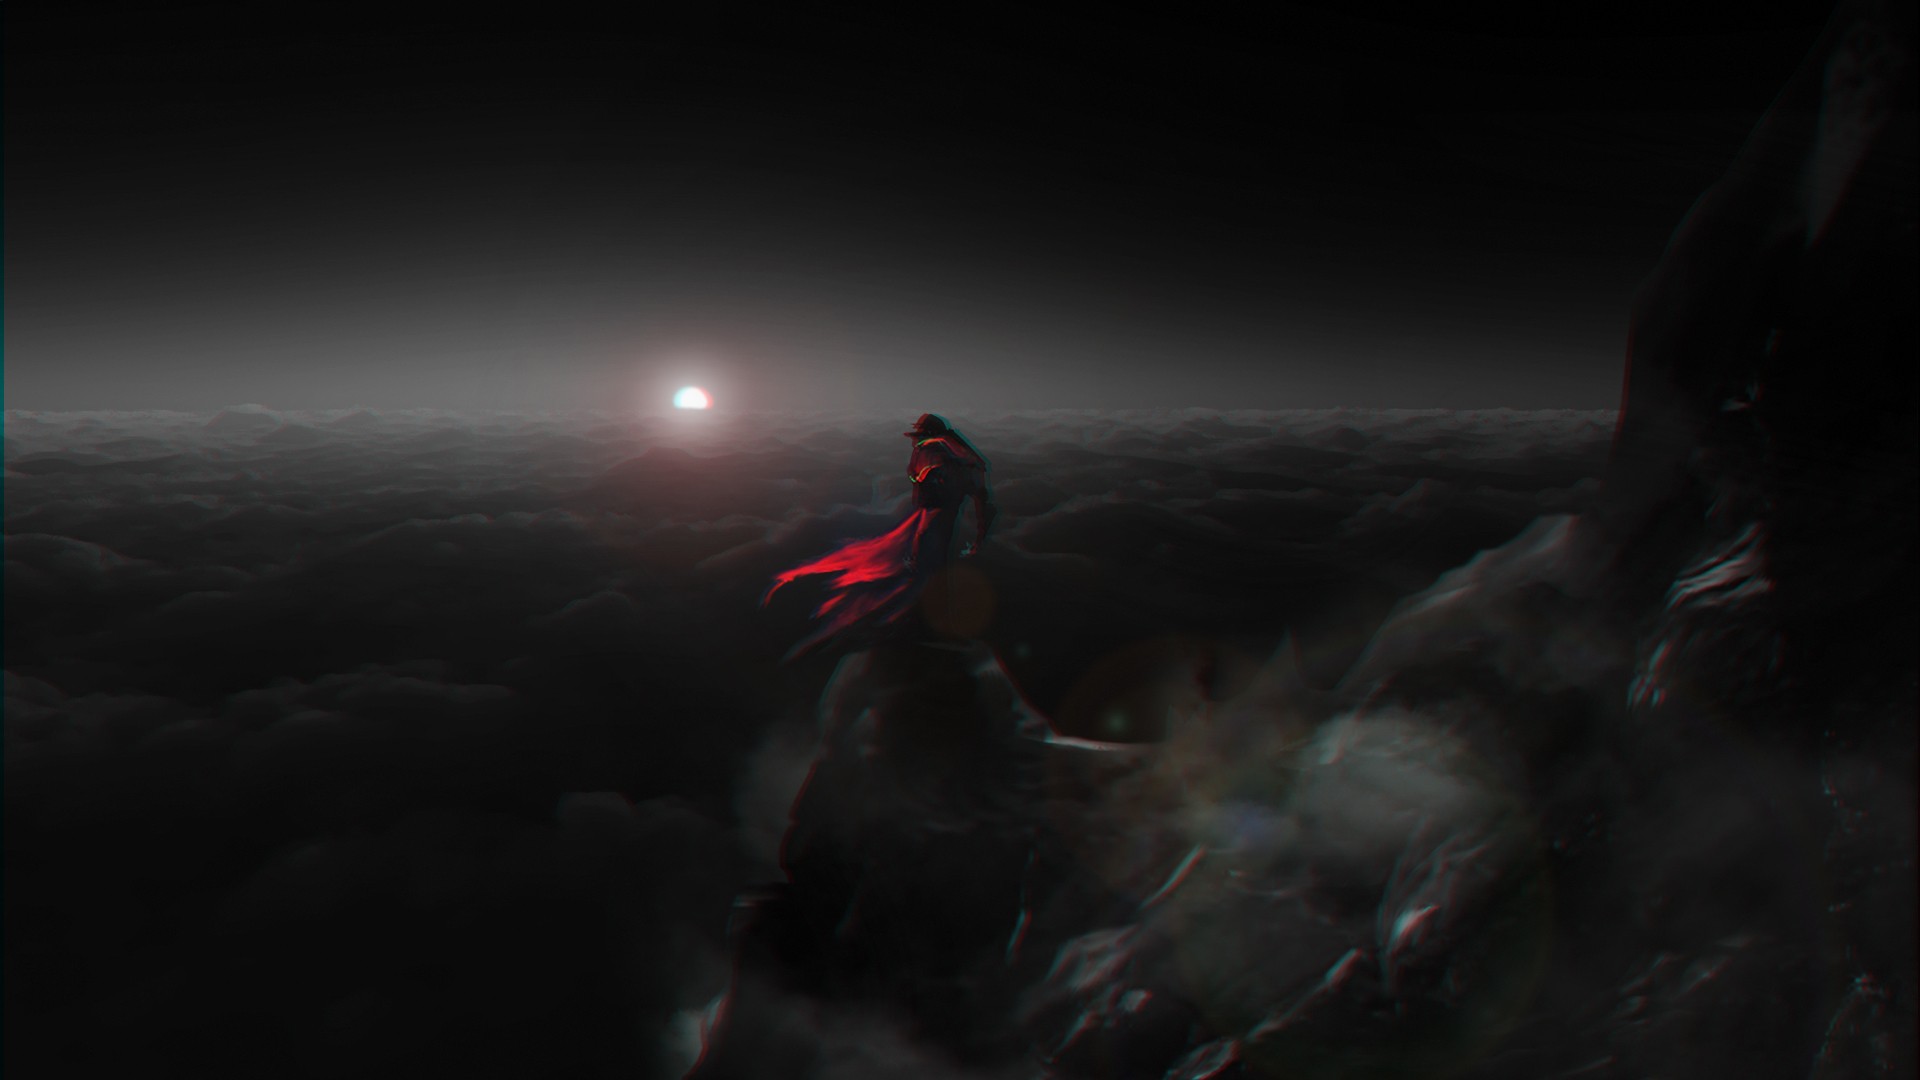 General 1920x1080 fantasy art Castlevania Dracula vampires clouds mountains effects Castlevania: Lords of Shadow